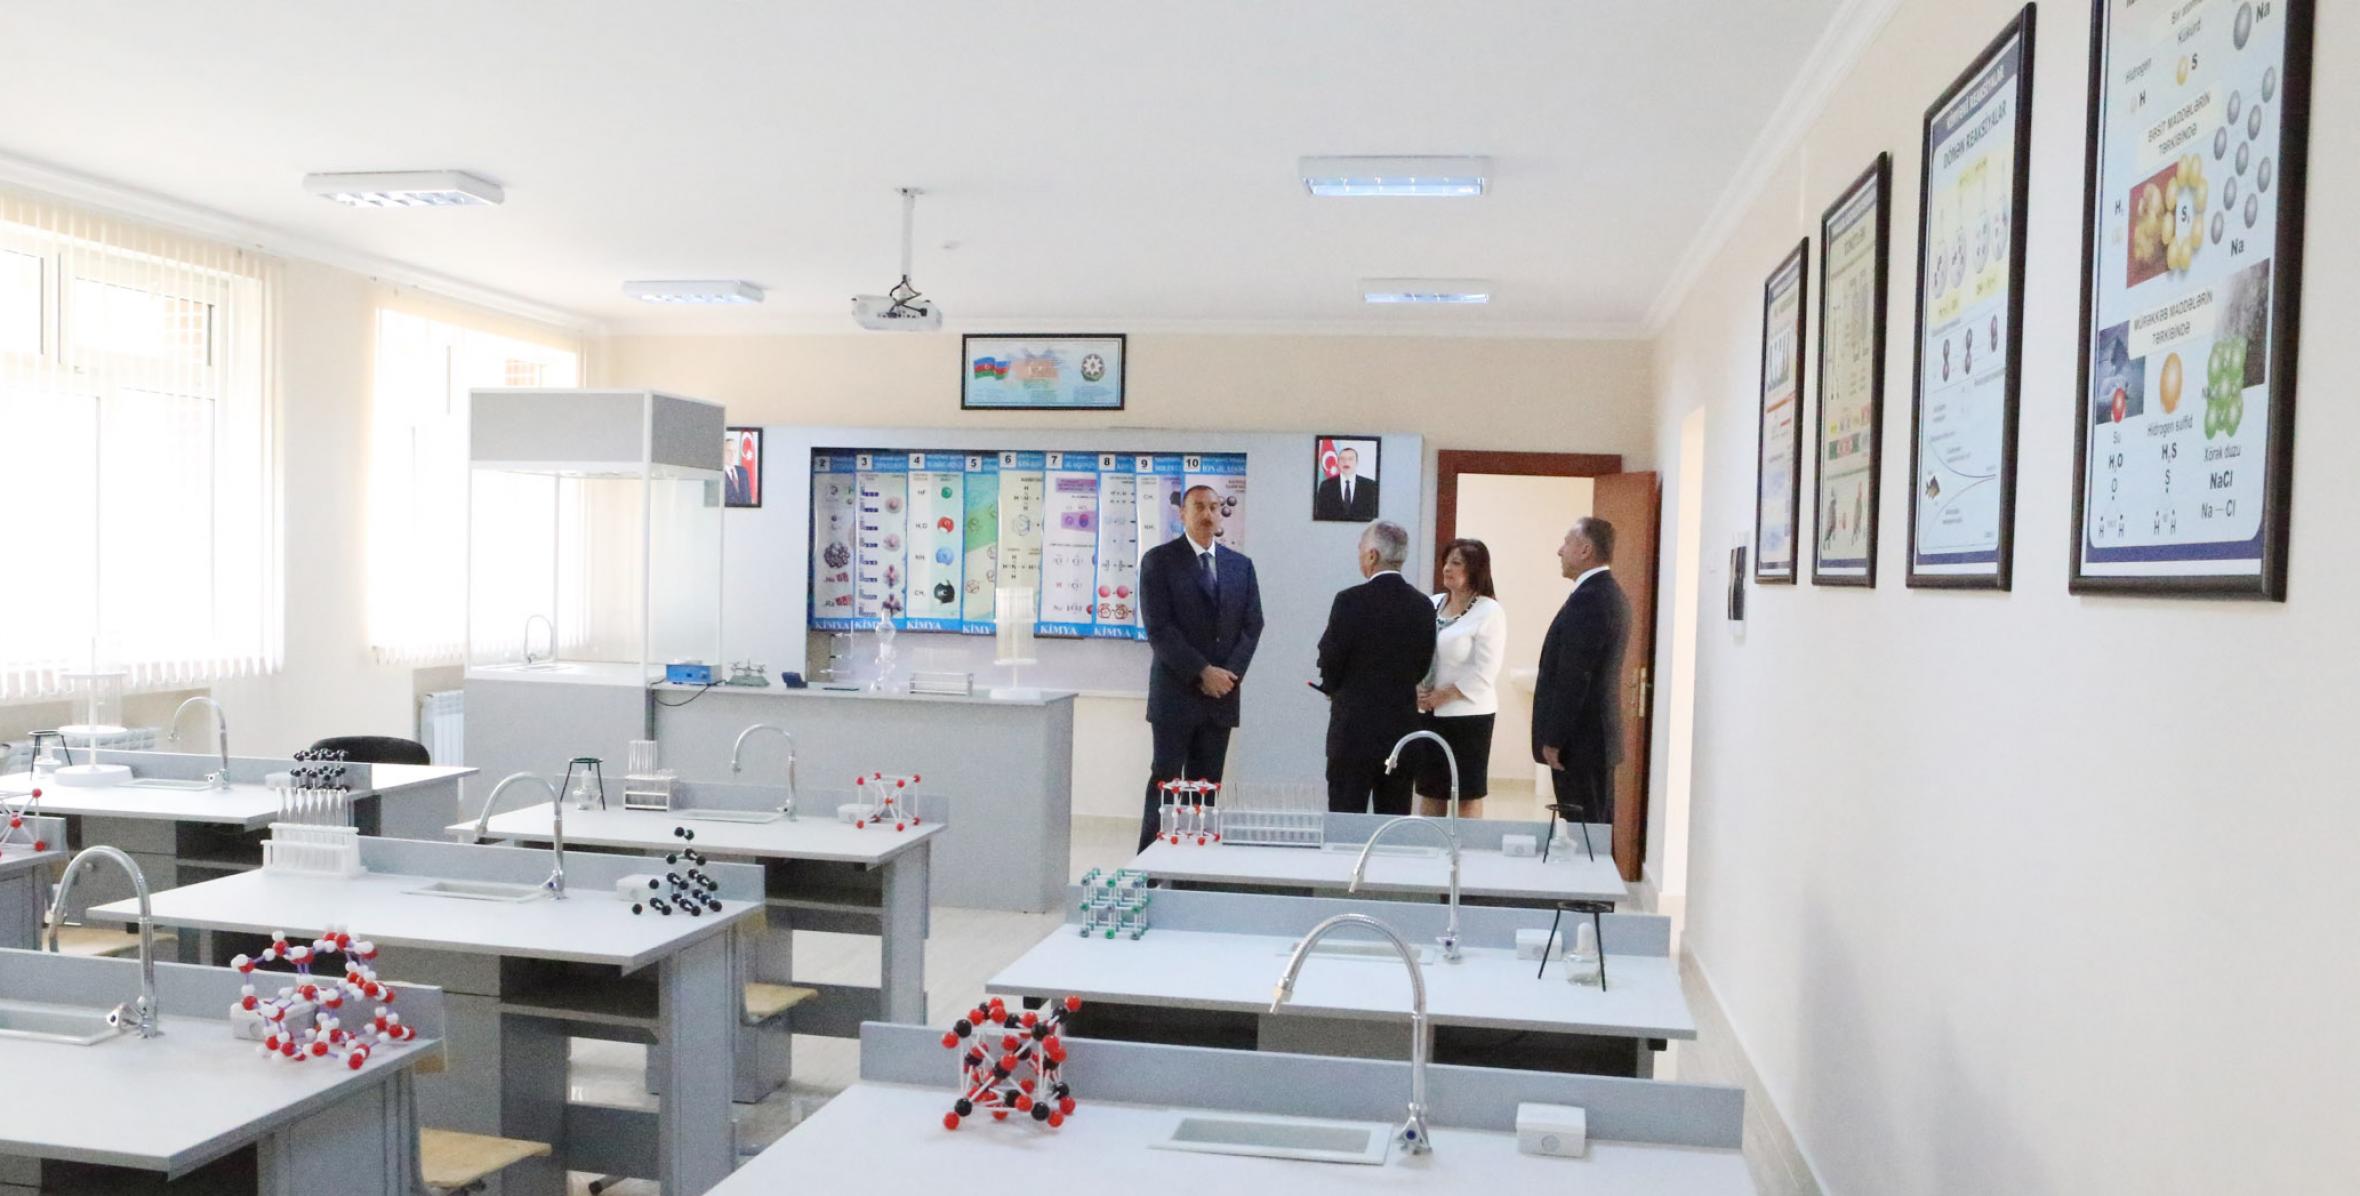 Ilham Aliyev reviewed secondary school No. 54 in Baku after major repair and reconstruction